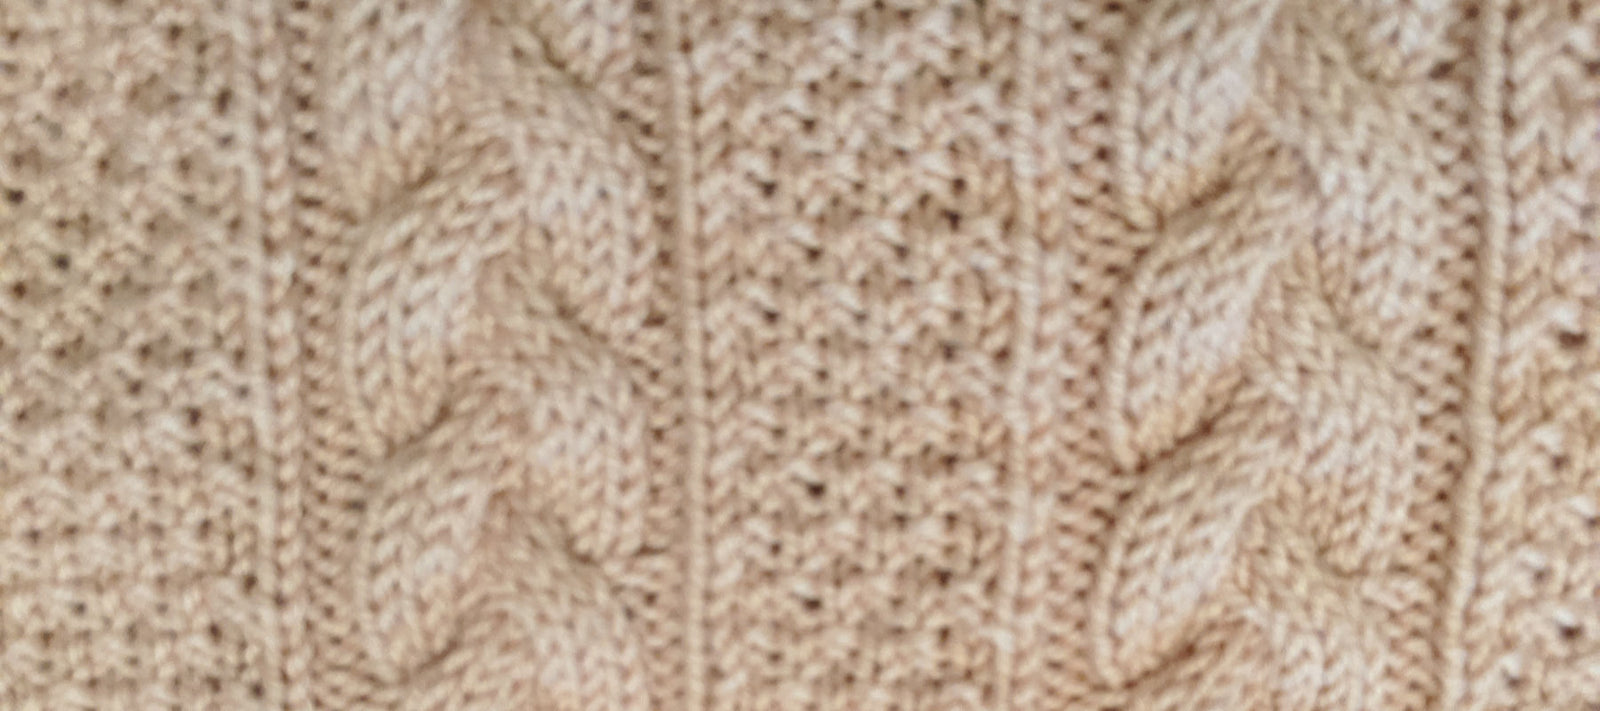 Learn to Knit: Working a Right Cross Cable without a Cable Needle - Stolen  Stitches